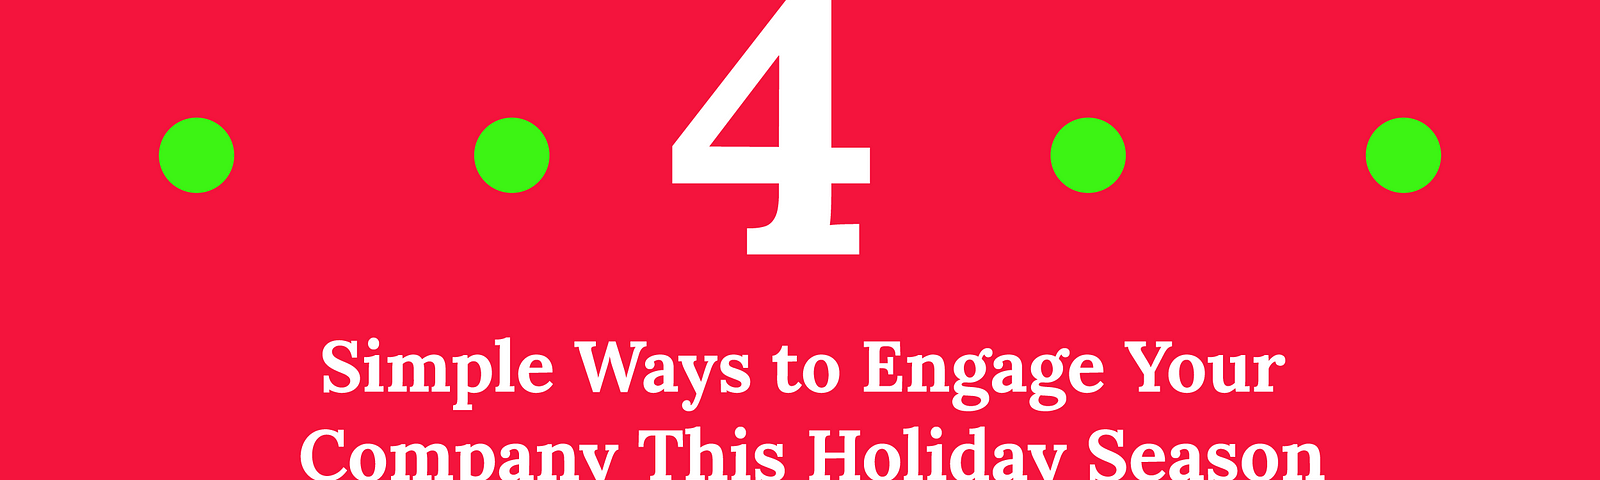 Four simple ways to engage your company this holiday season